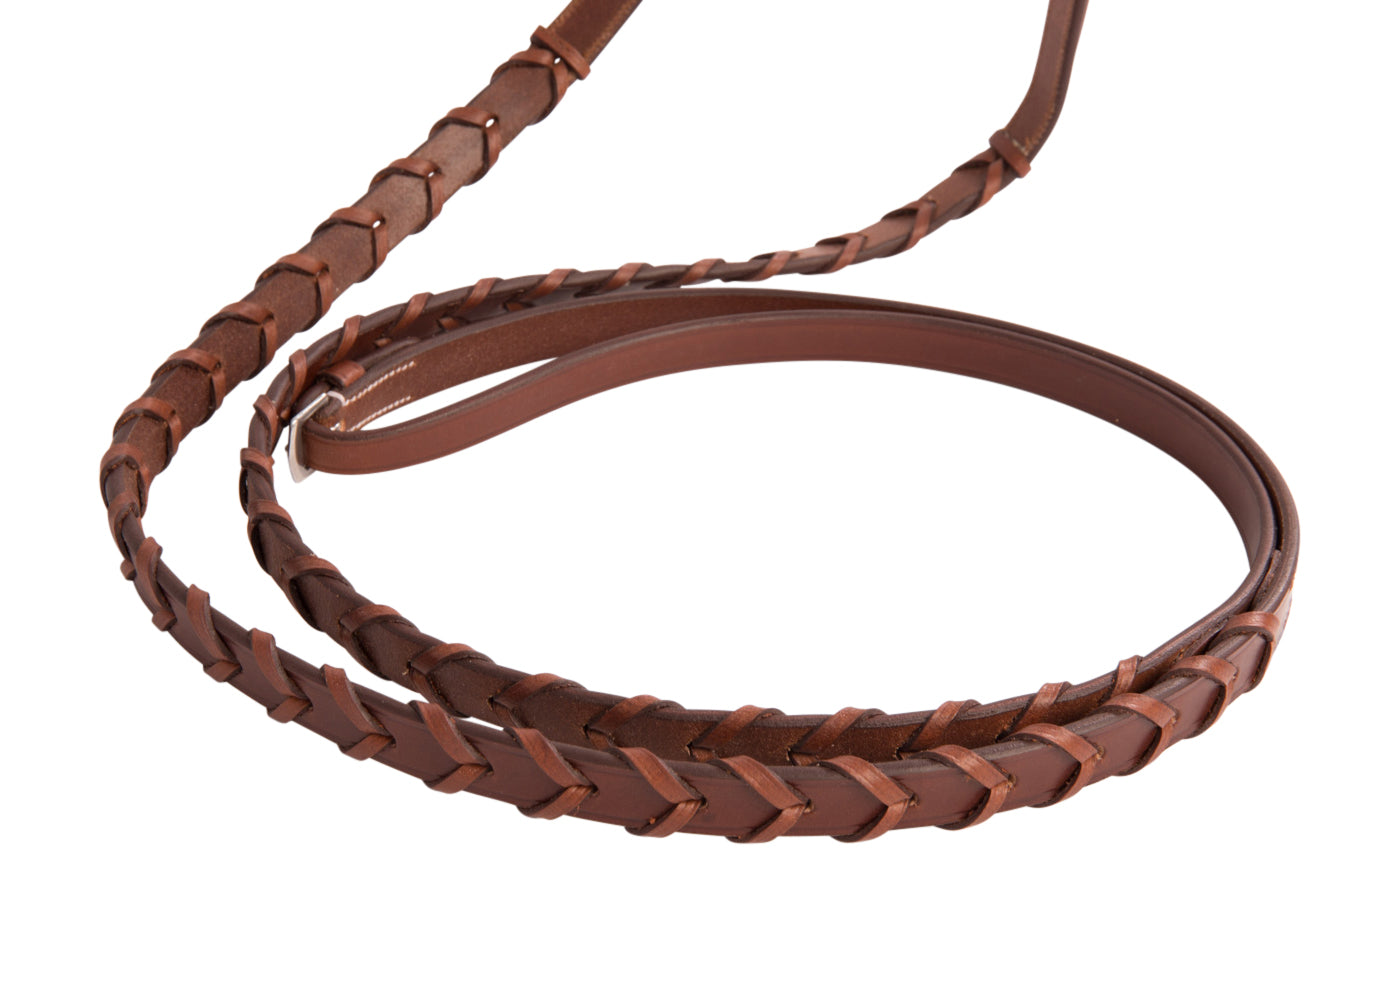 Leather lace with stitching 5,0 x 2,0mm - brown, 3,23 €